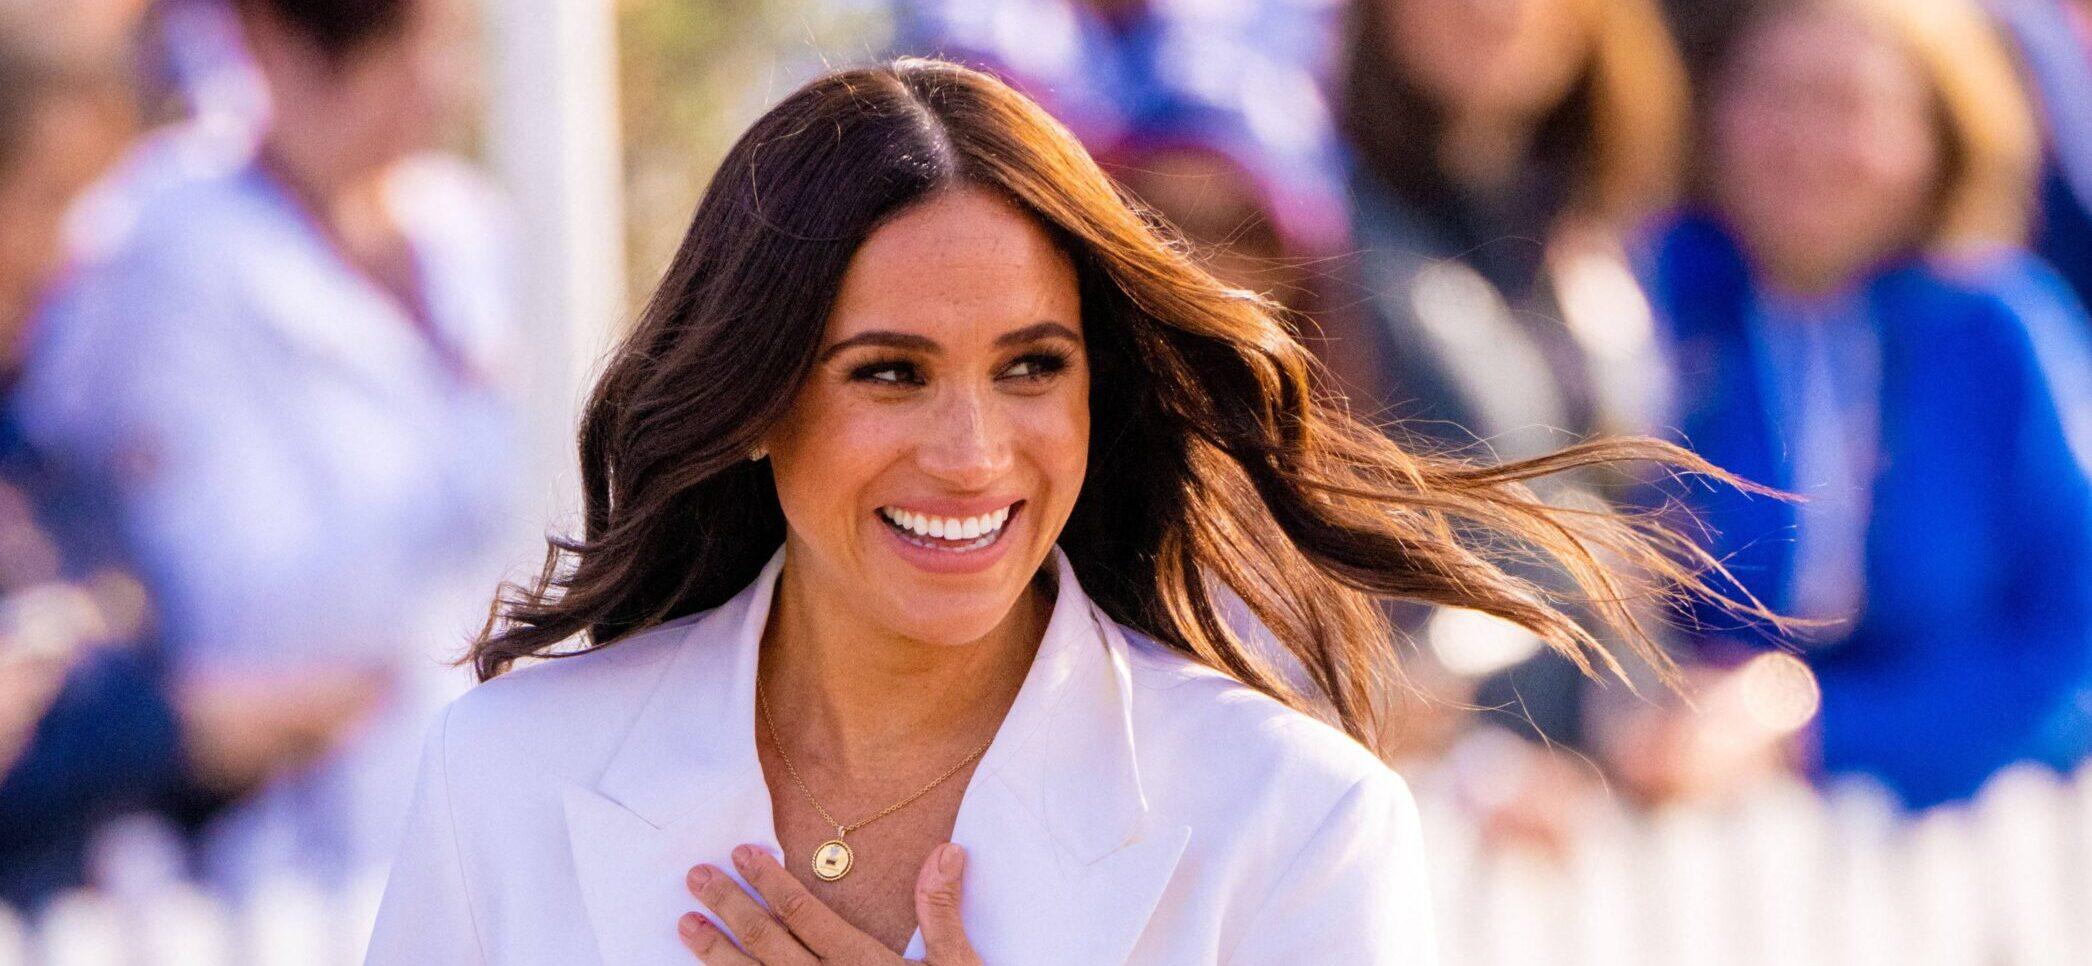 Meghan Markle’s Engagement Ring Sparks Debate Among Royal Fans As It Appears ‘Enlarged’